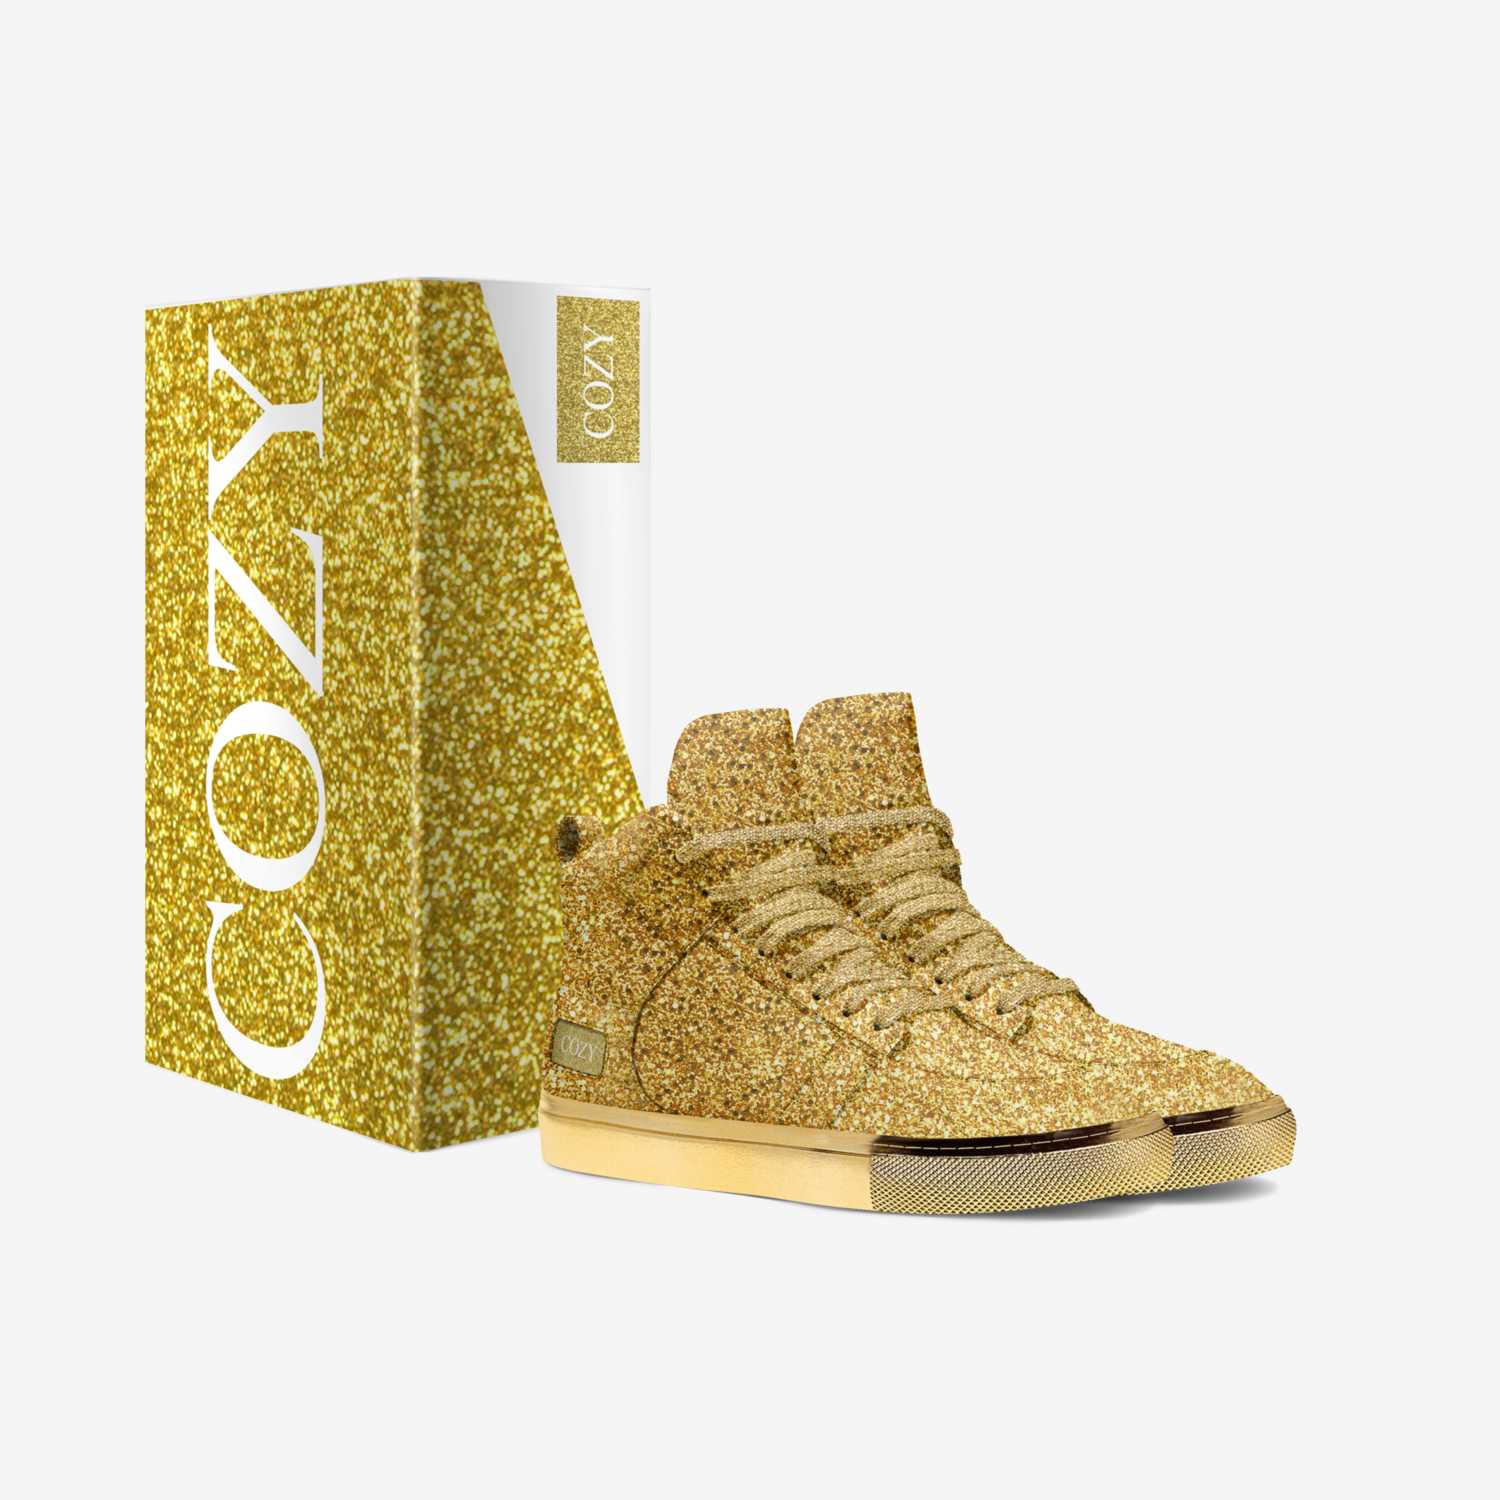 COZY KICKS GOLD 2 custom made in Italy shoes by Charles Mcusa | Box view